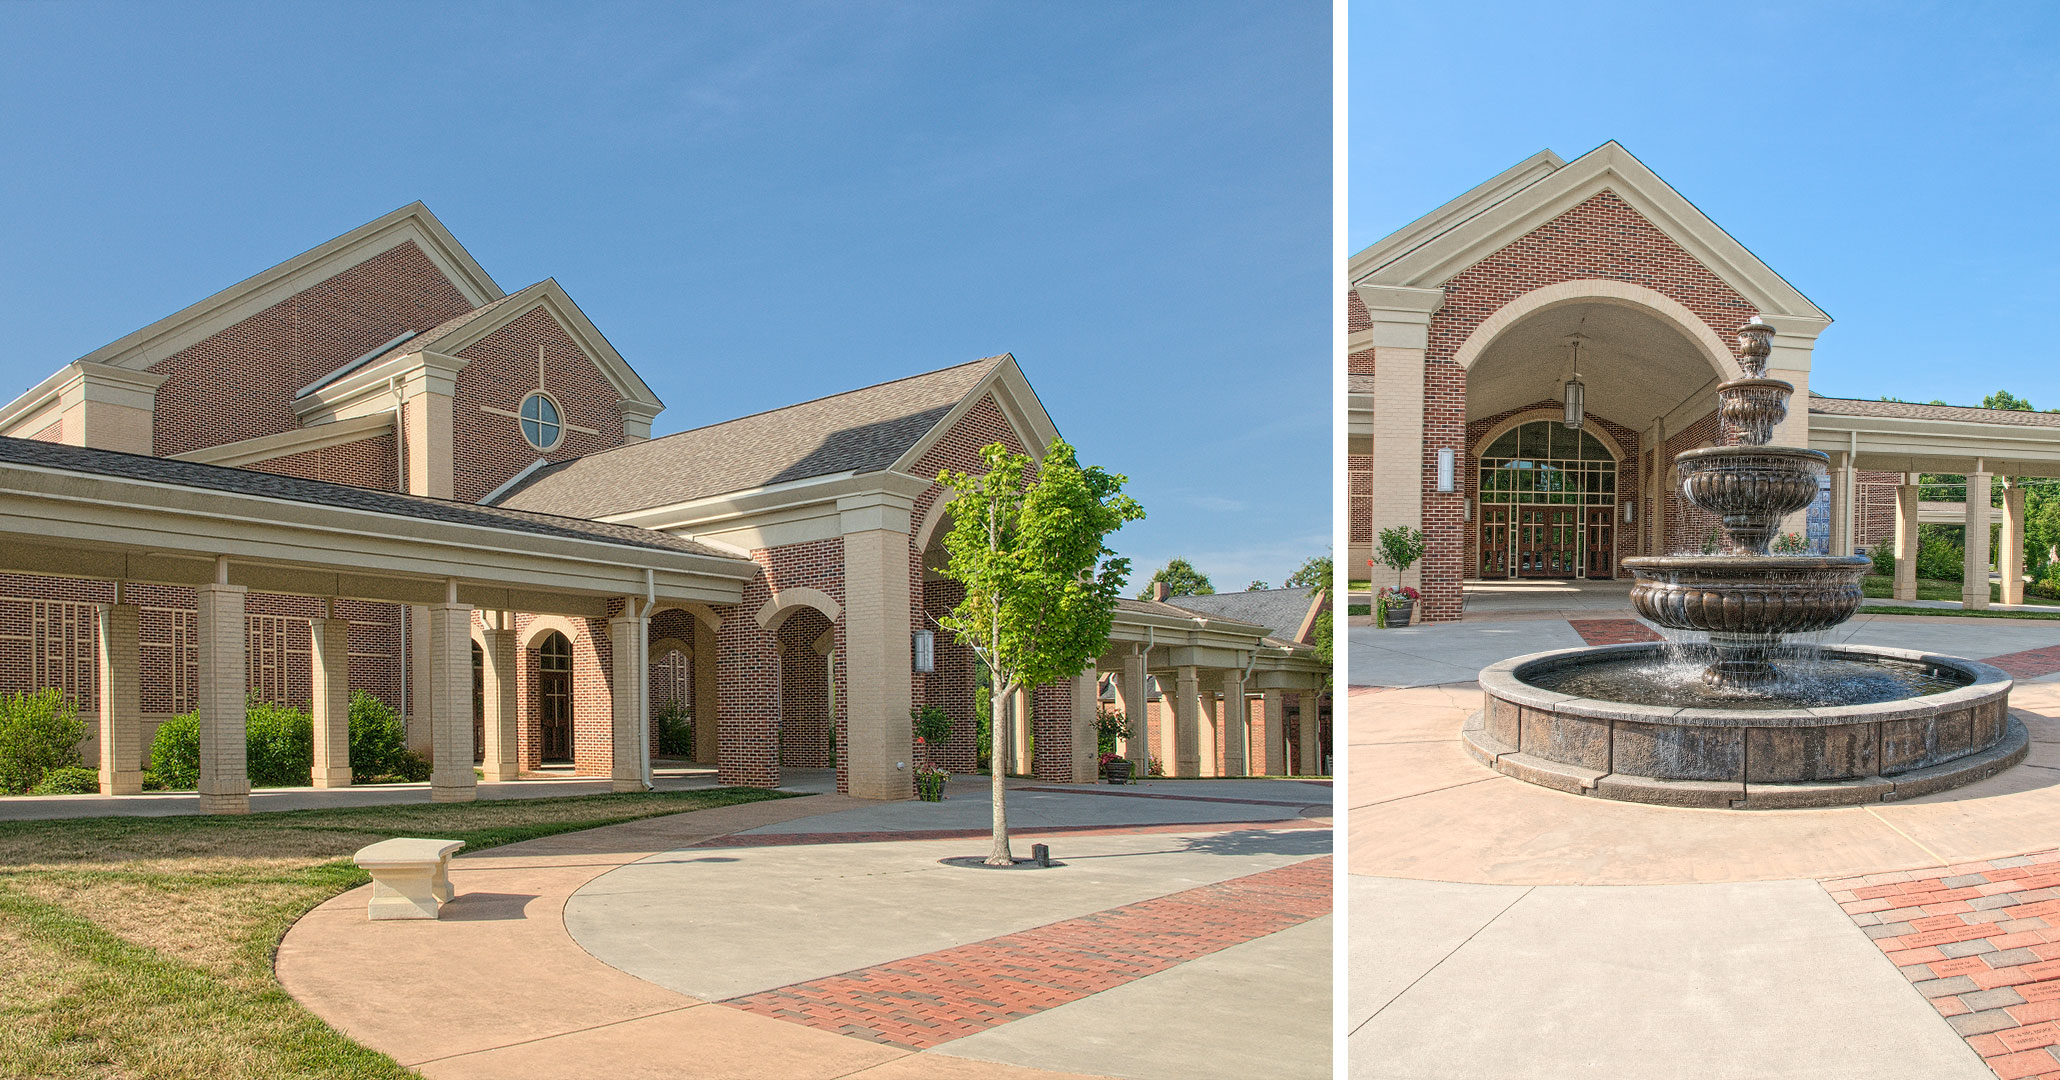 Boudreaux architects worked with St. Mark Catholic Church to design a new church for parishers.